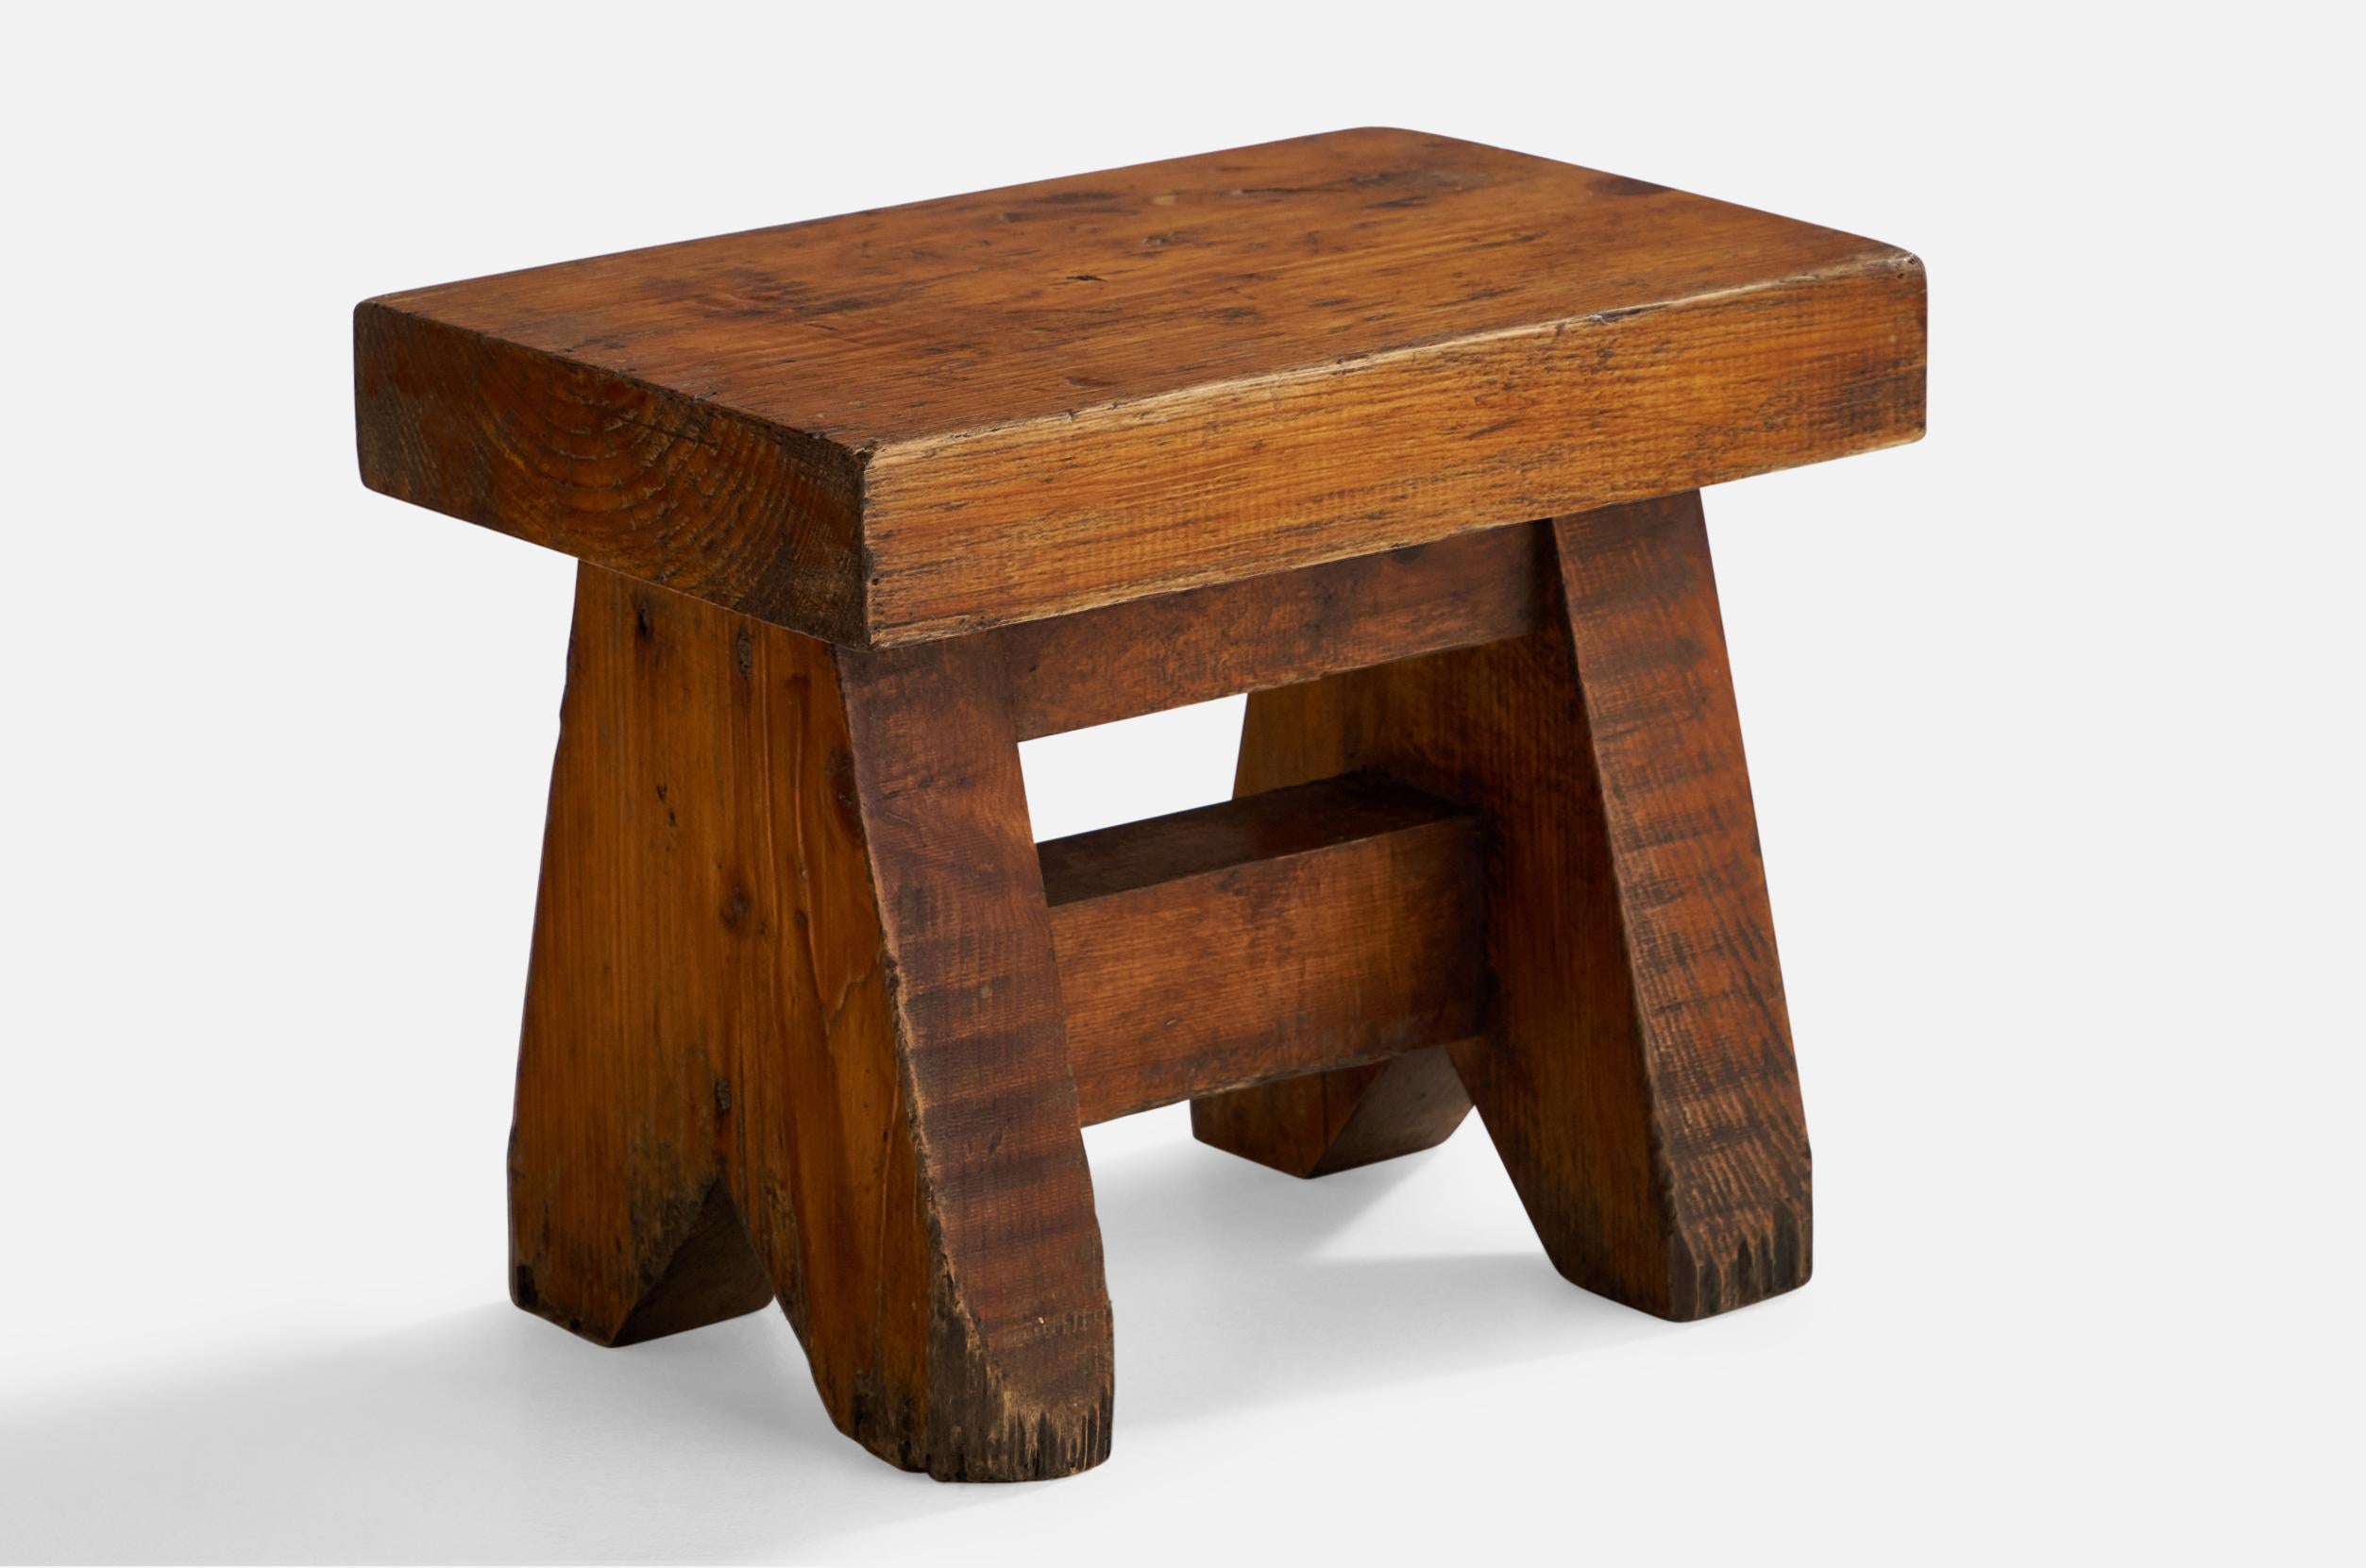 A small oak stool designed and produced in Italy, c. 1930s.

Seat height: 9.25”